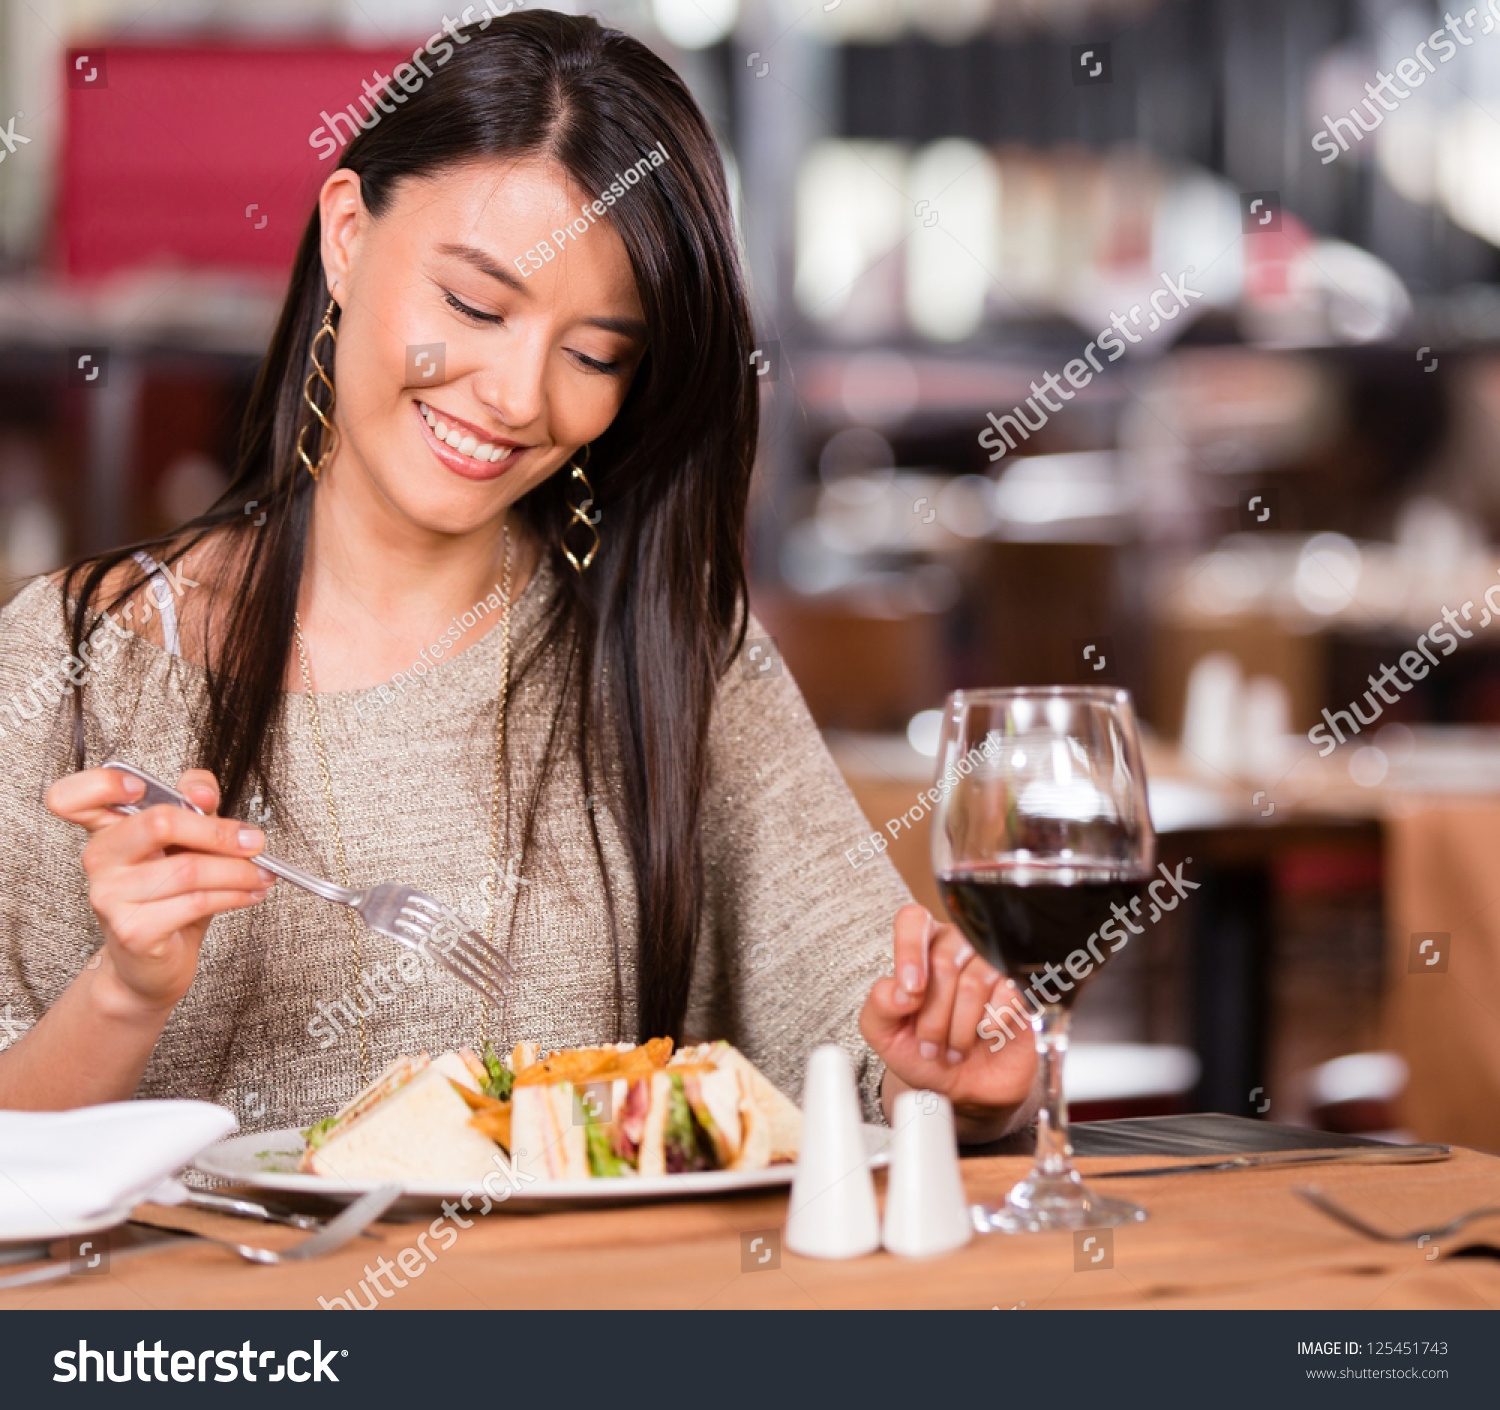 Woman eating at a restaurant looking very happy #125451743